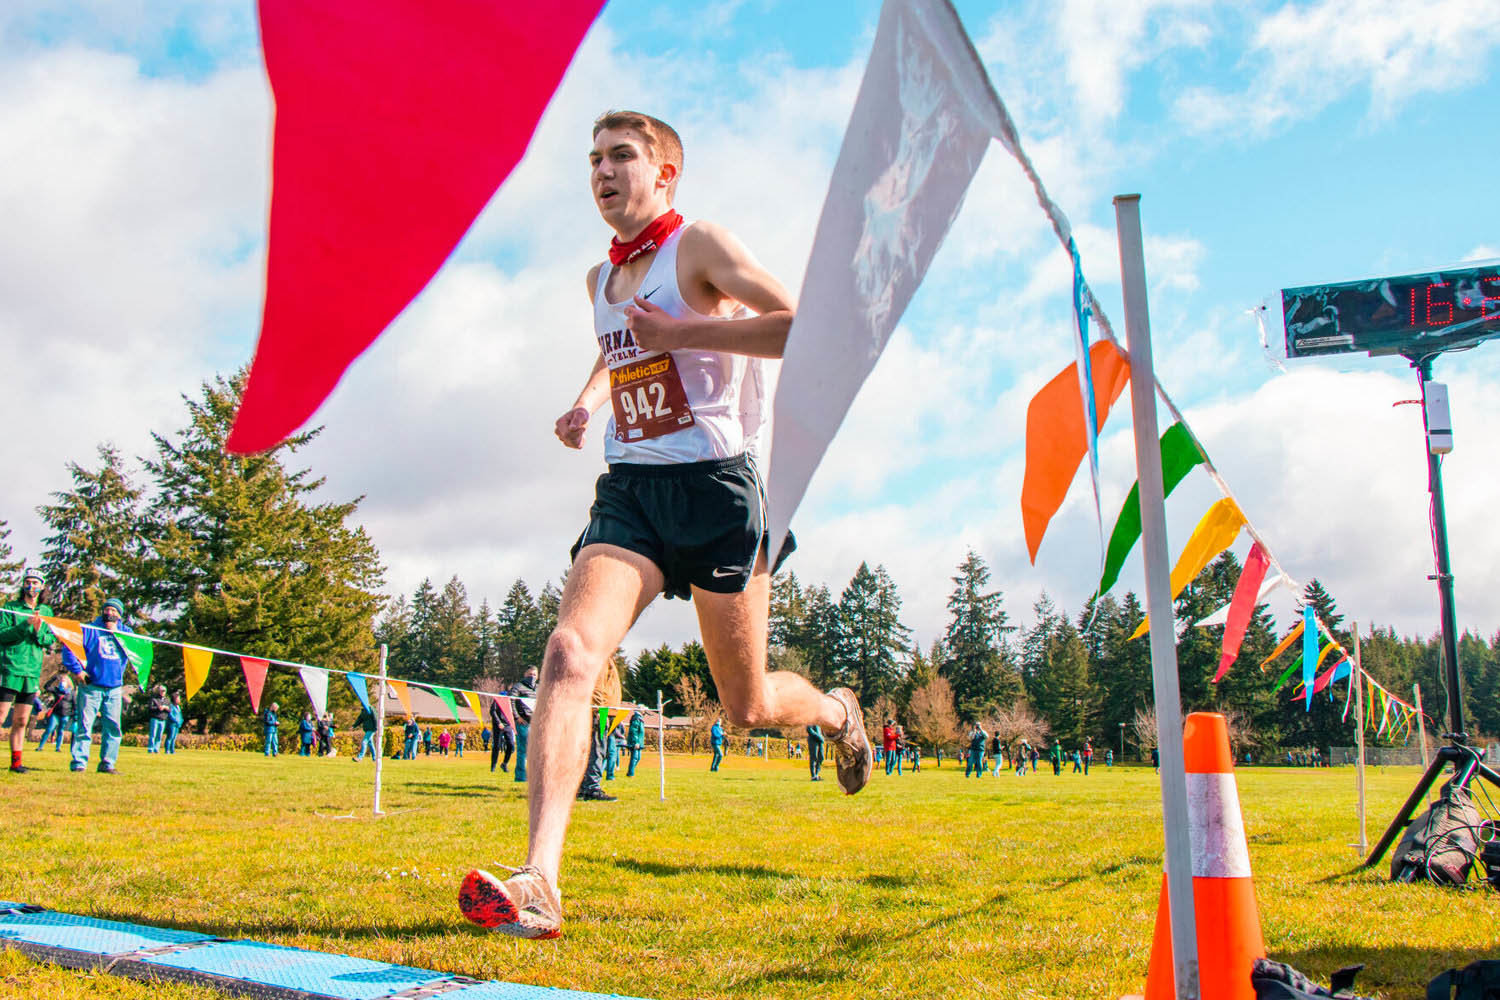 Bryce Cerkowniak runs during a cross-country meet at LBA Park in Olympia in March 2021.